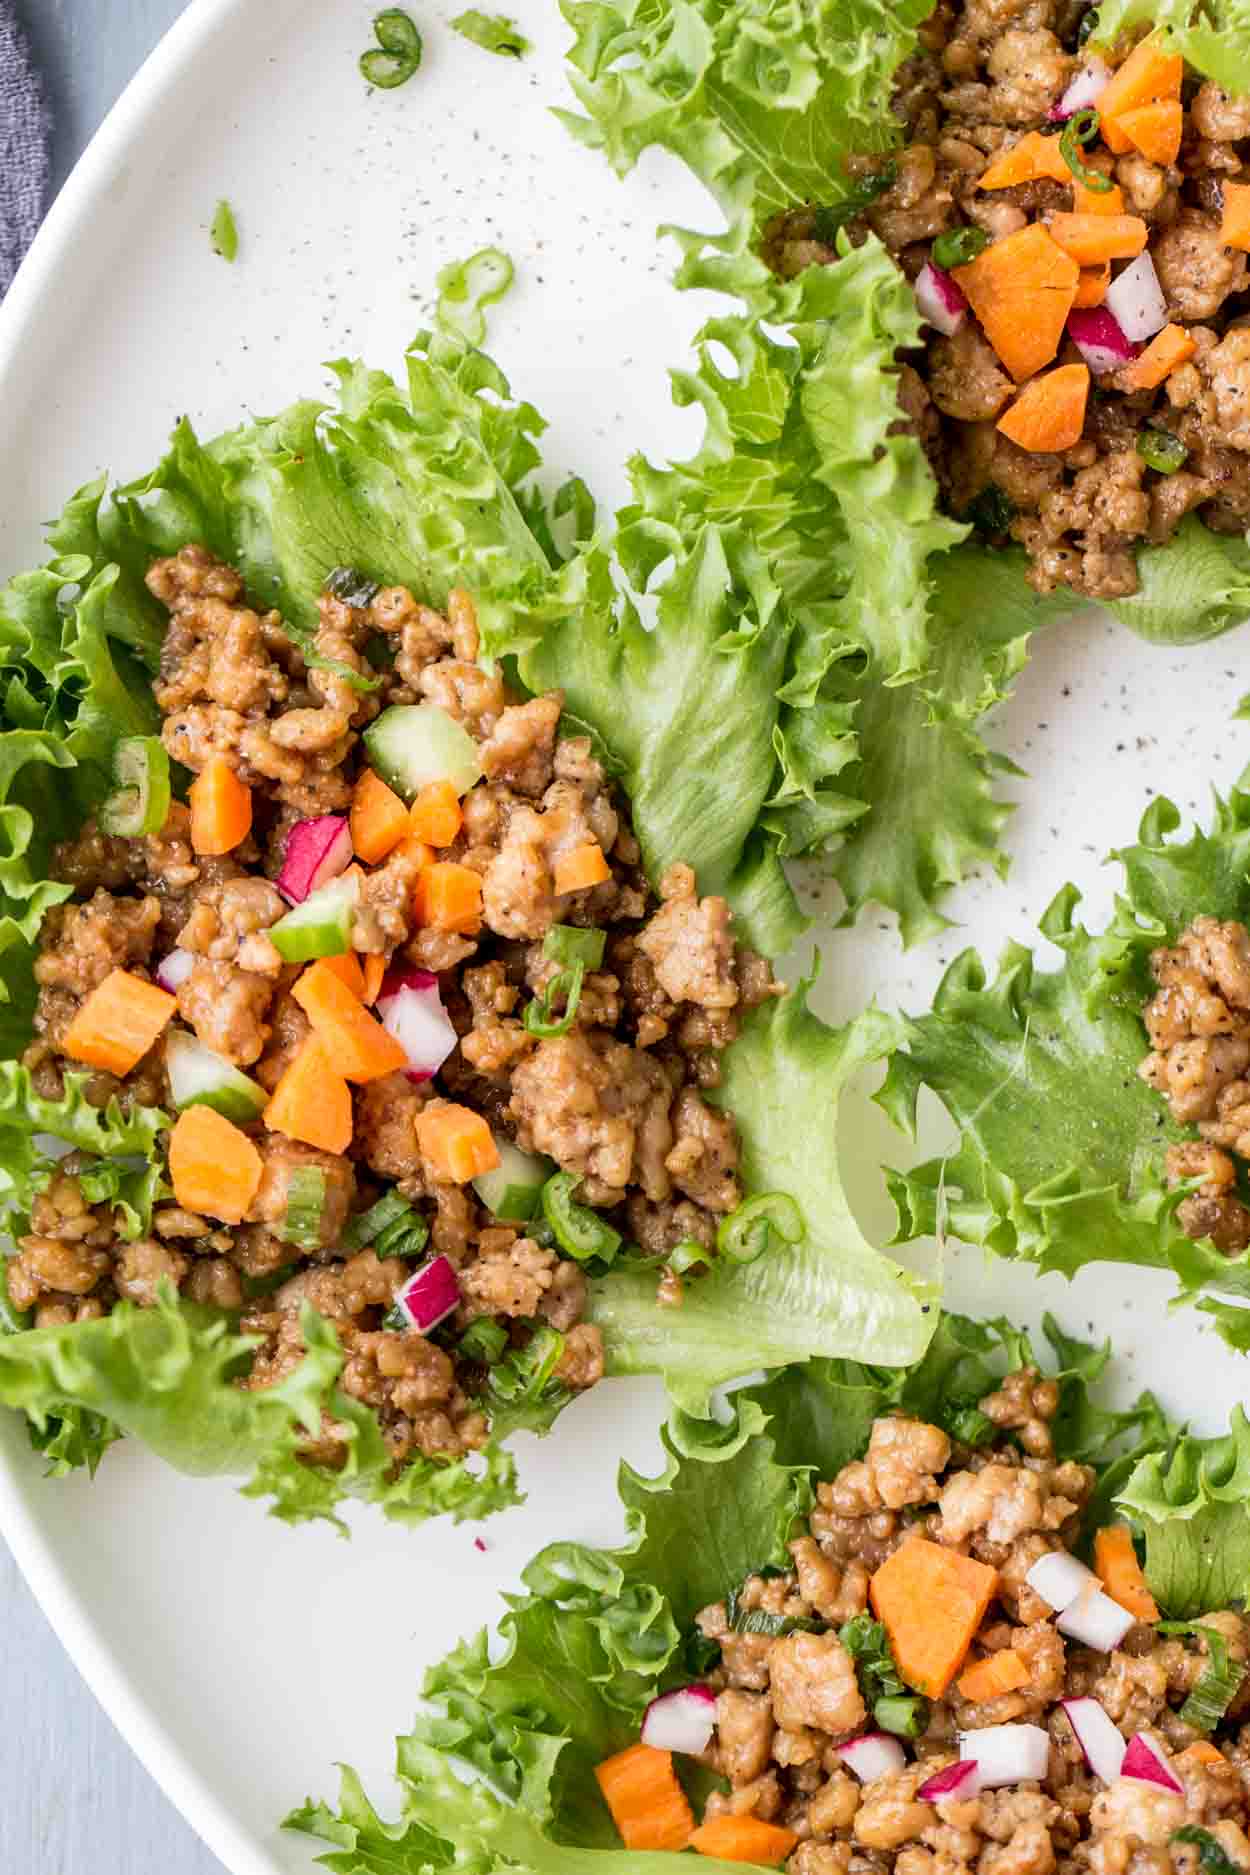 Ground meat with toppings on a bed of lettuce.